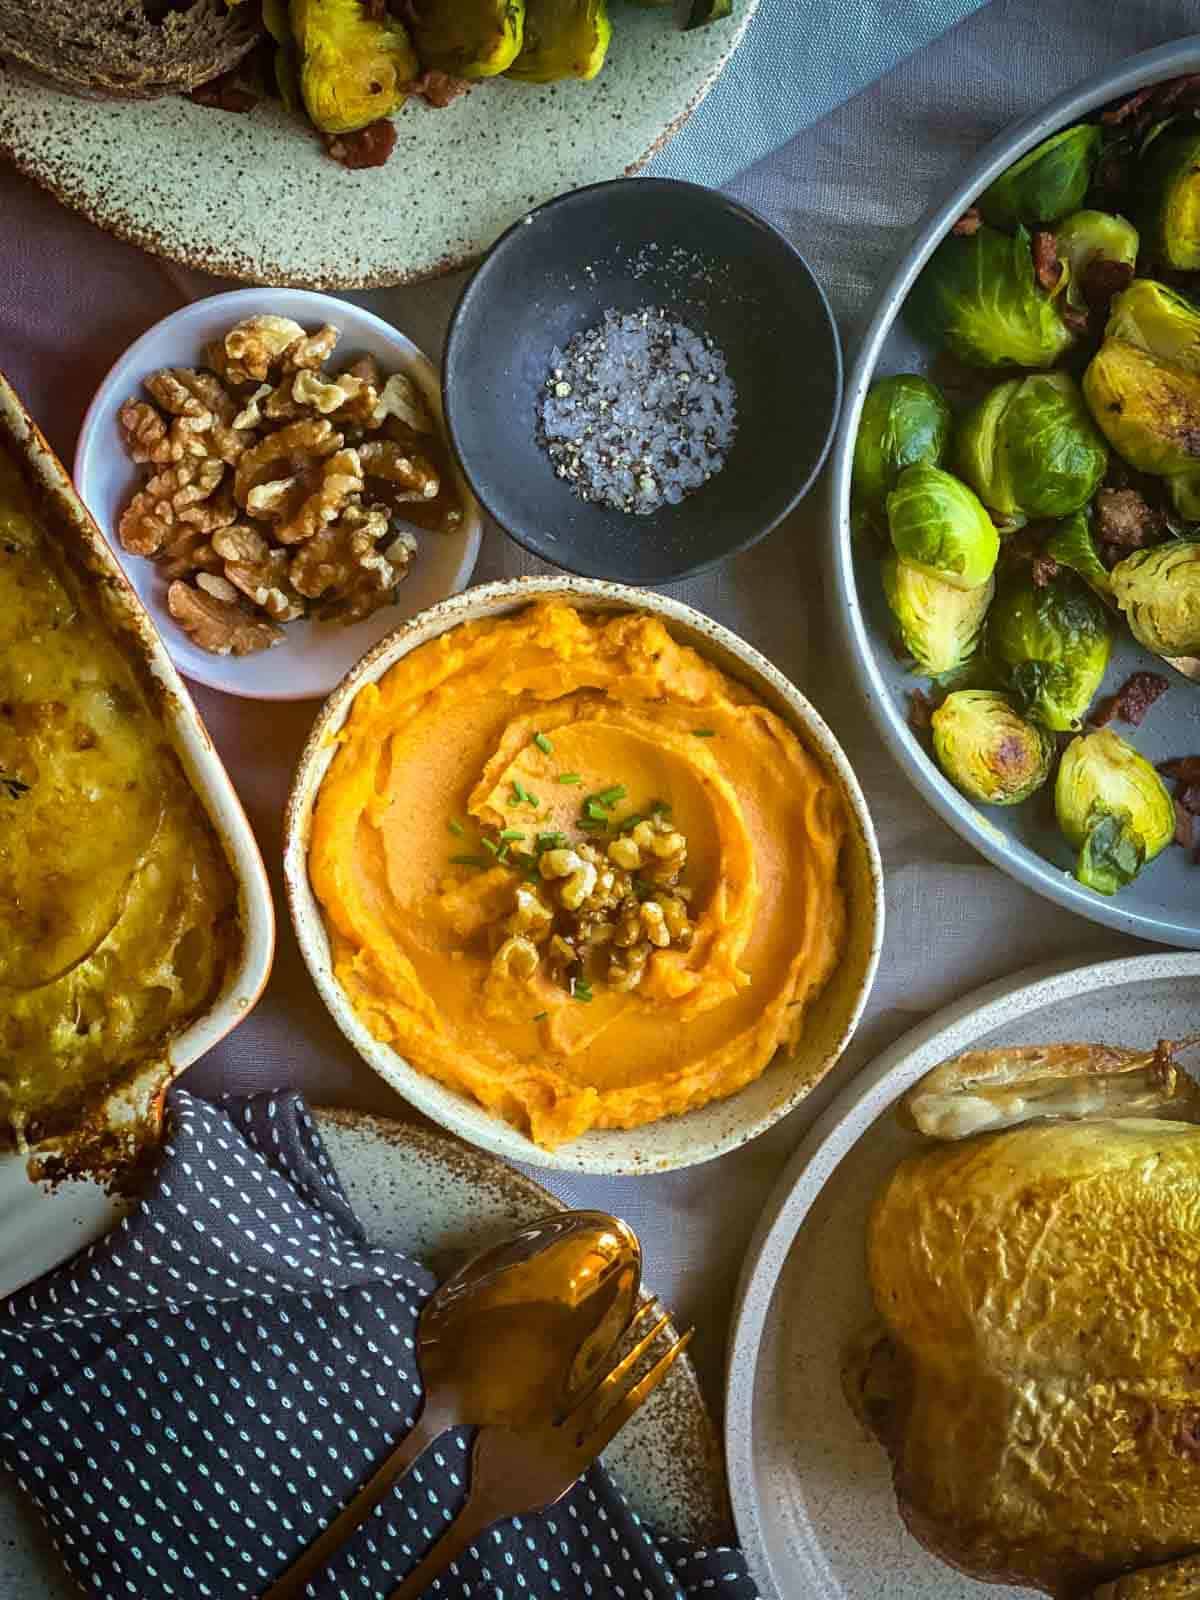 A spoon in a bow of whipped sweet potato next to a bowl of walnuts, Brussel sprouts and roast chicken